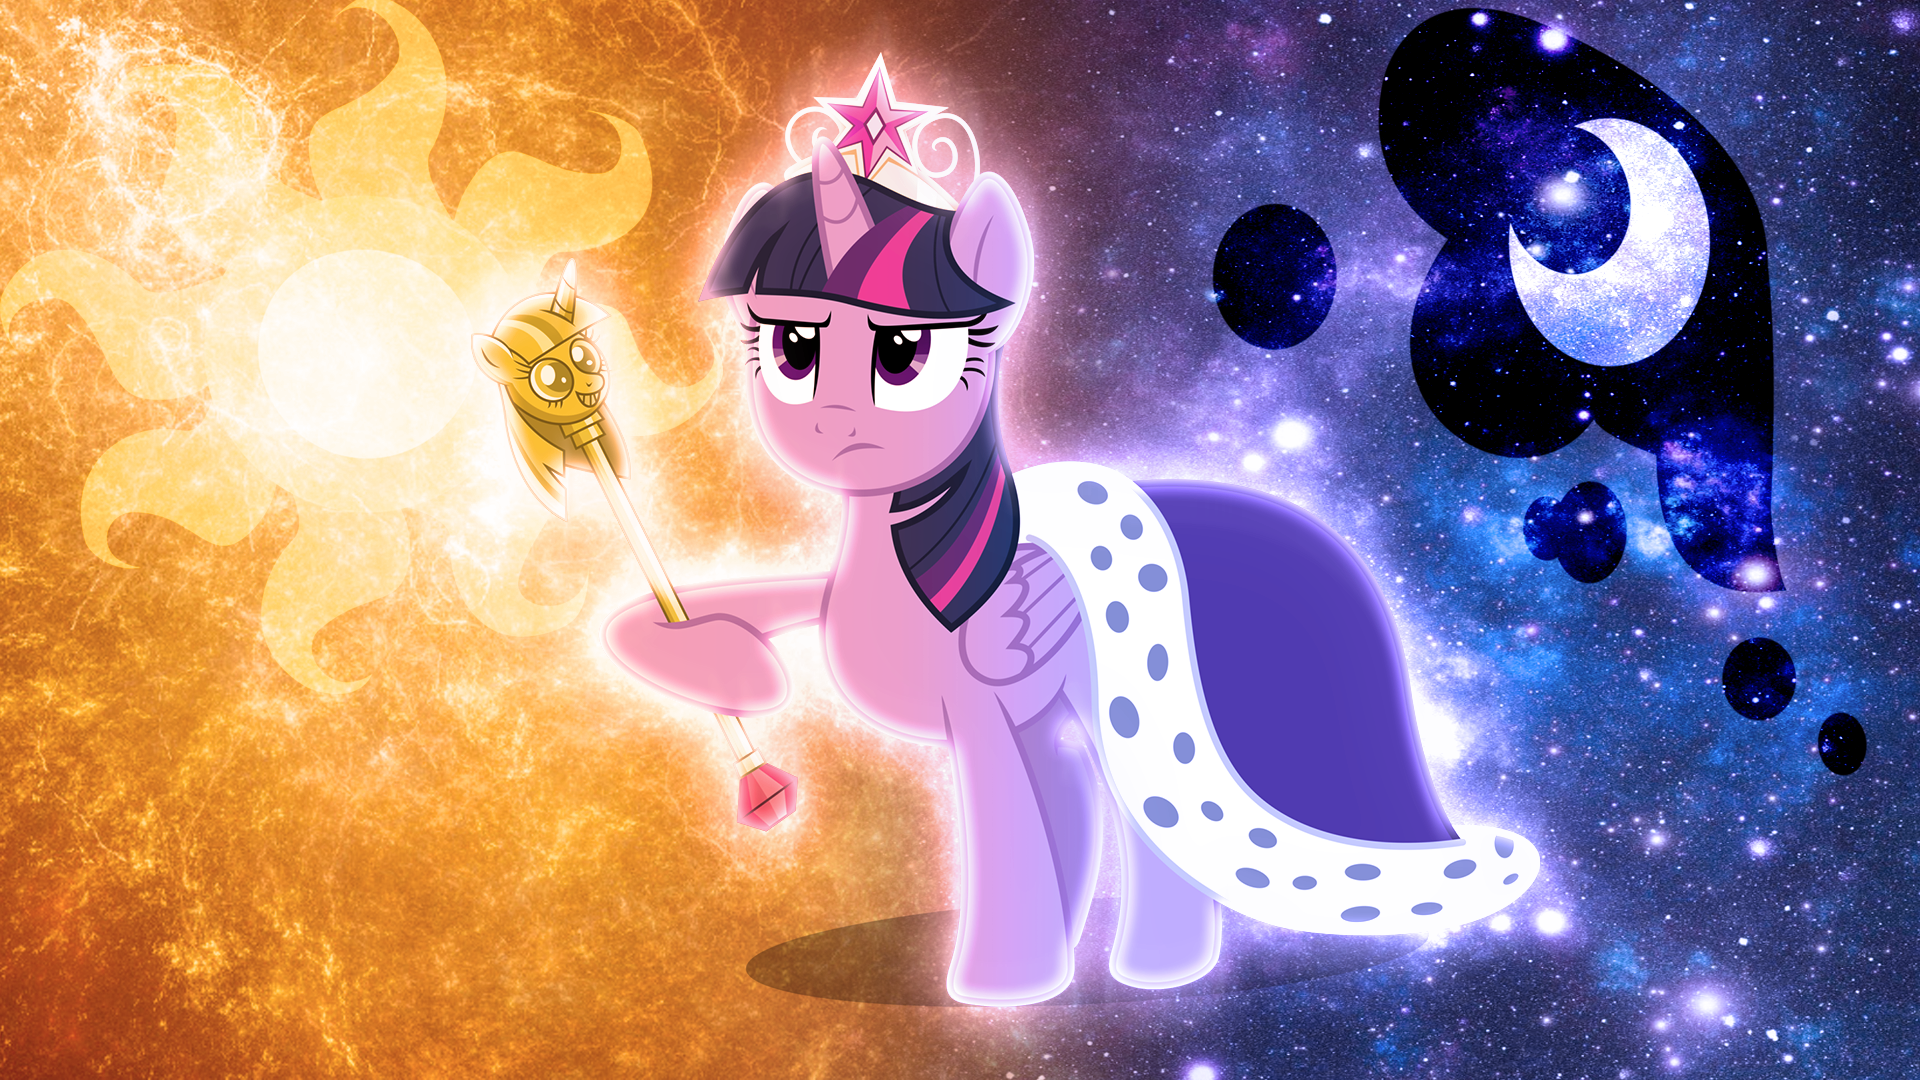 Twilight Sparkle Scepter by BlackGryph0n, CaNoN-lb, SirSpikensons and TheMusicBrony